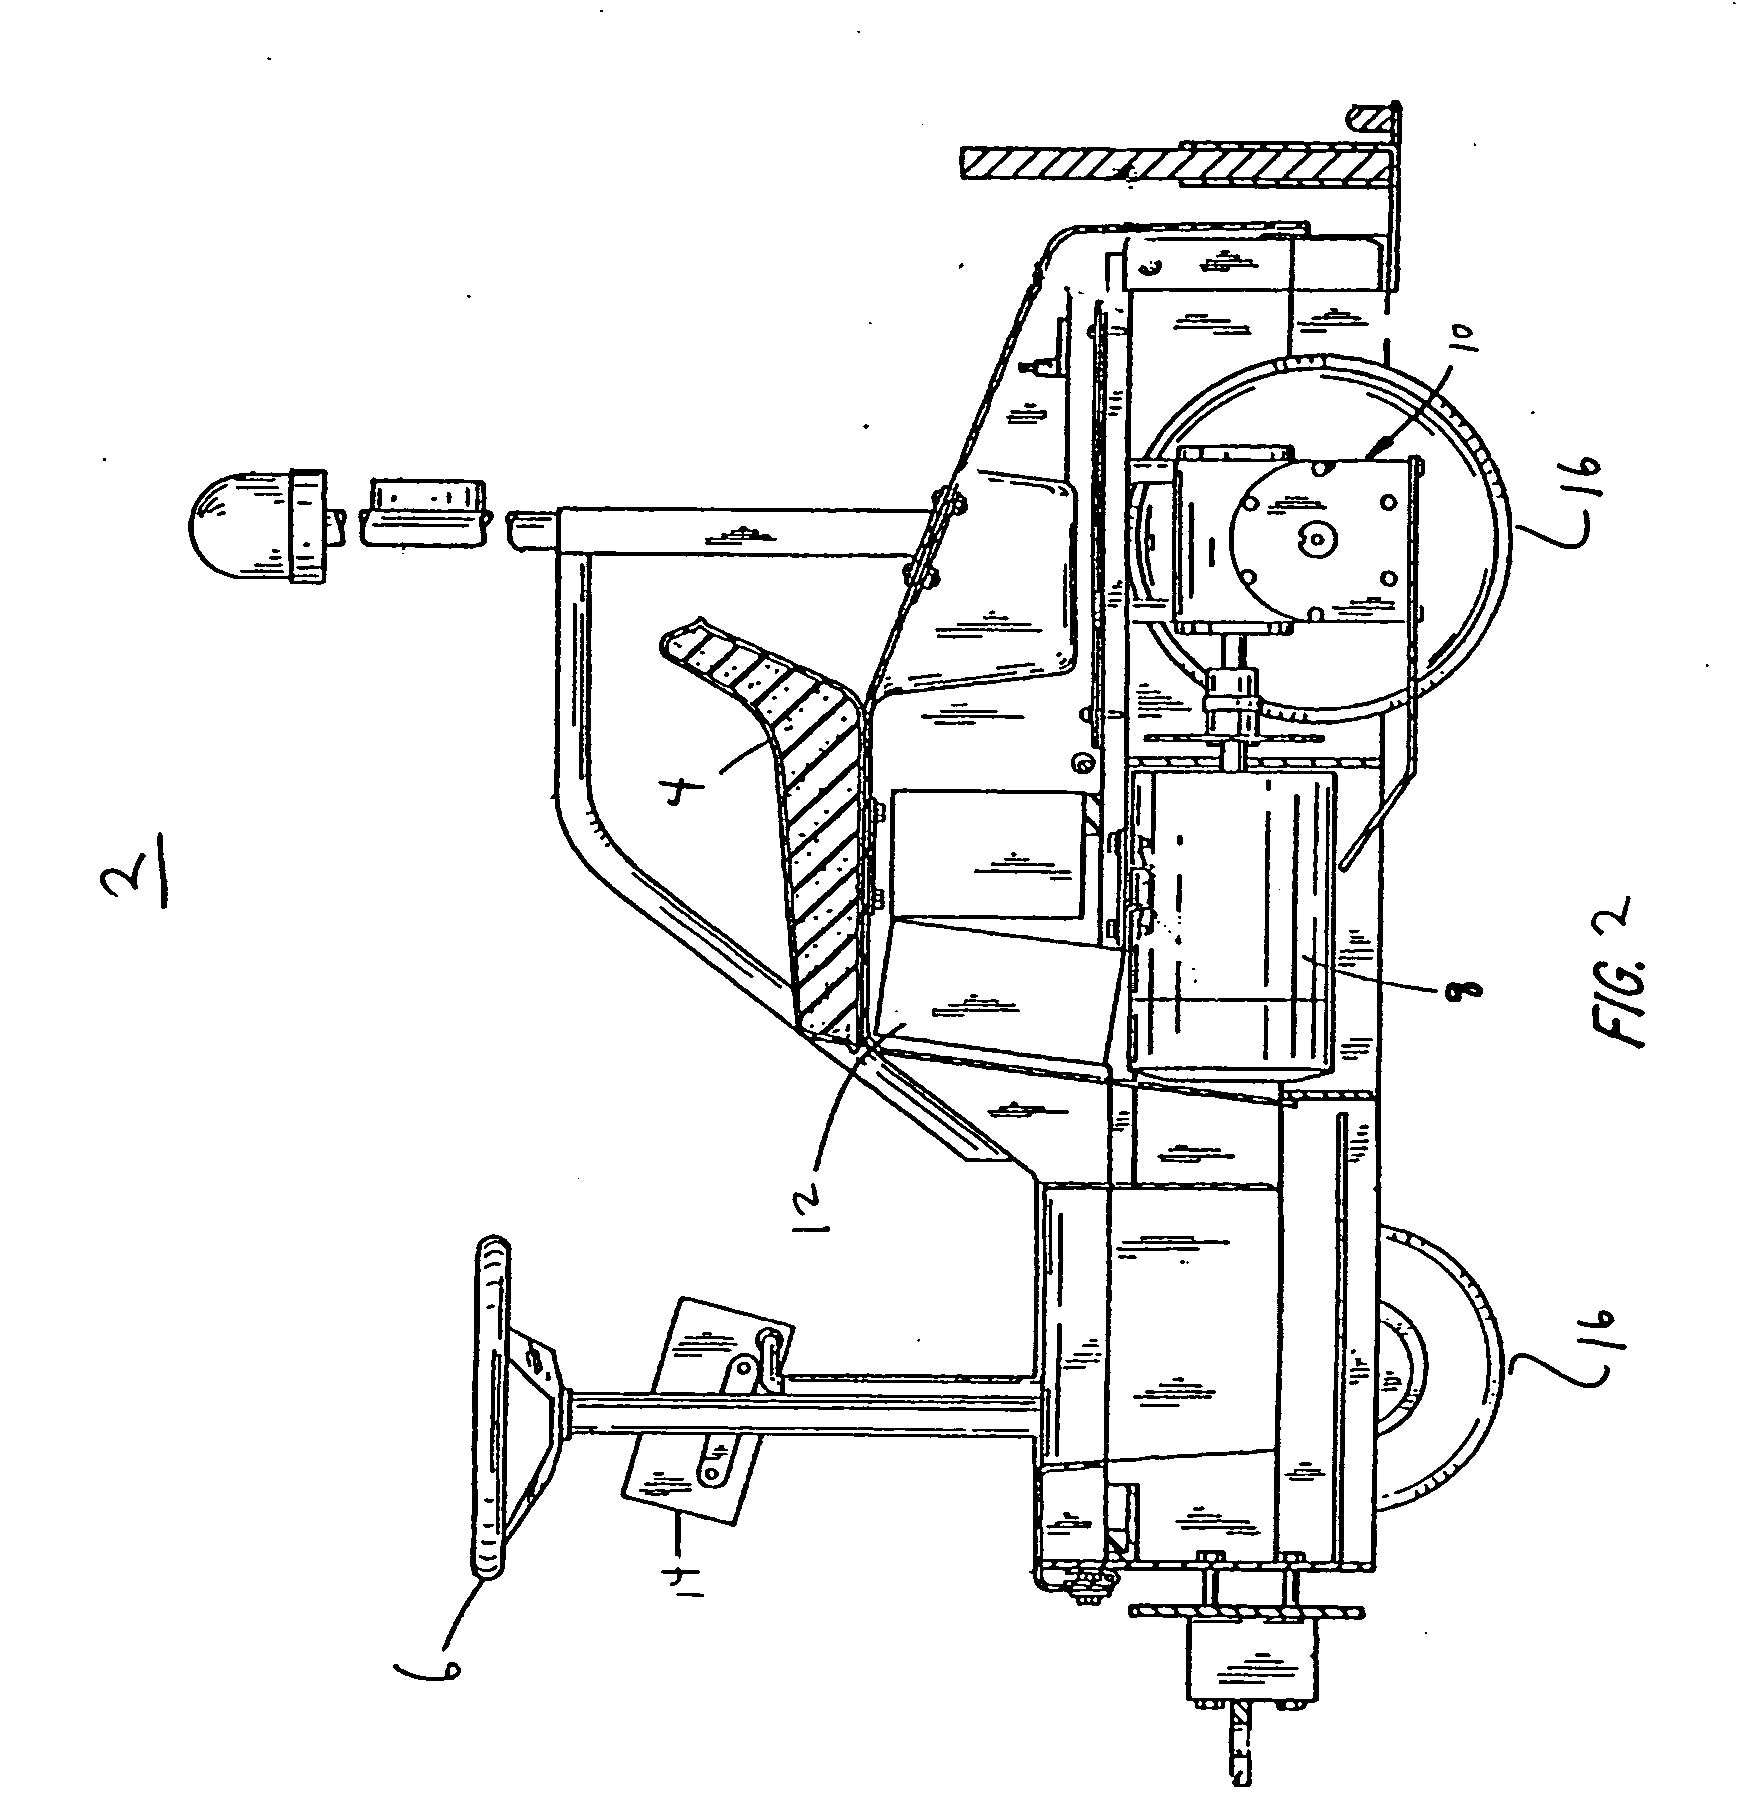 Power-assisted cart retriever with attenuated power output